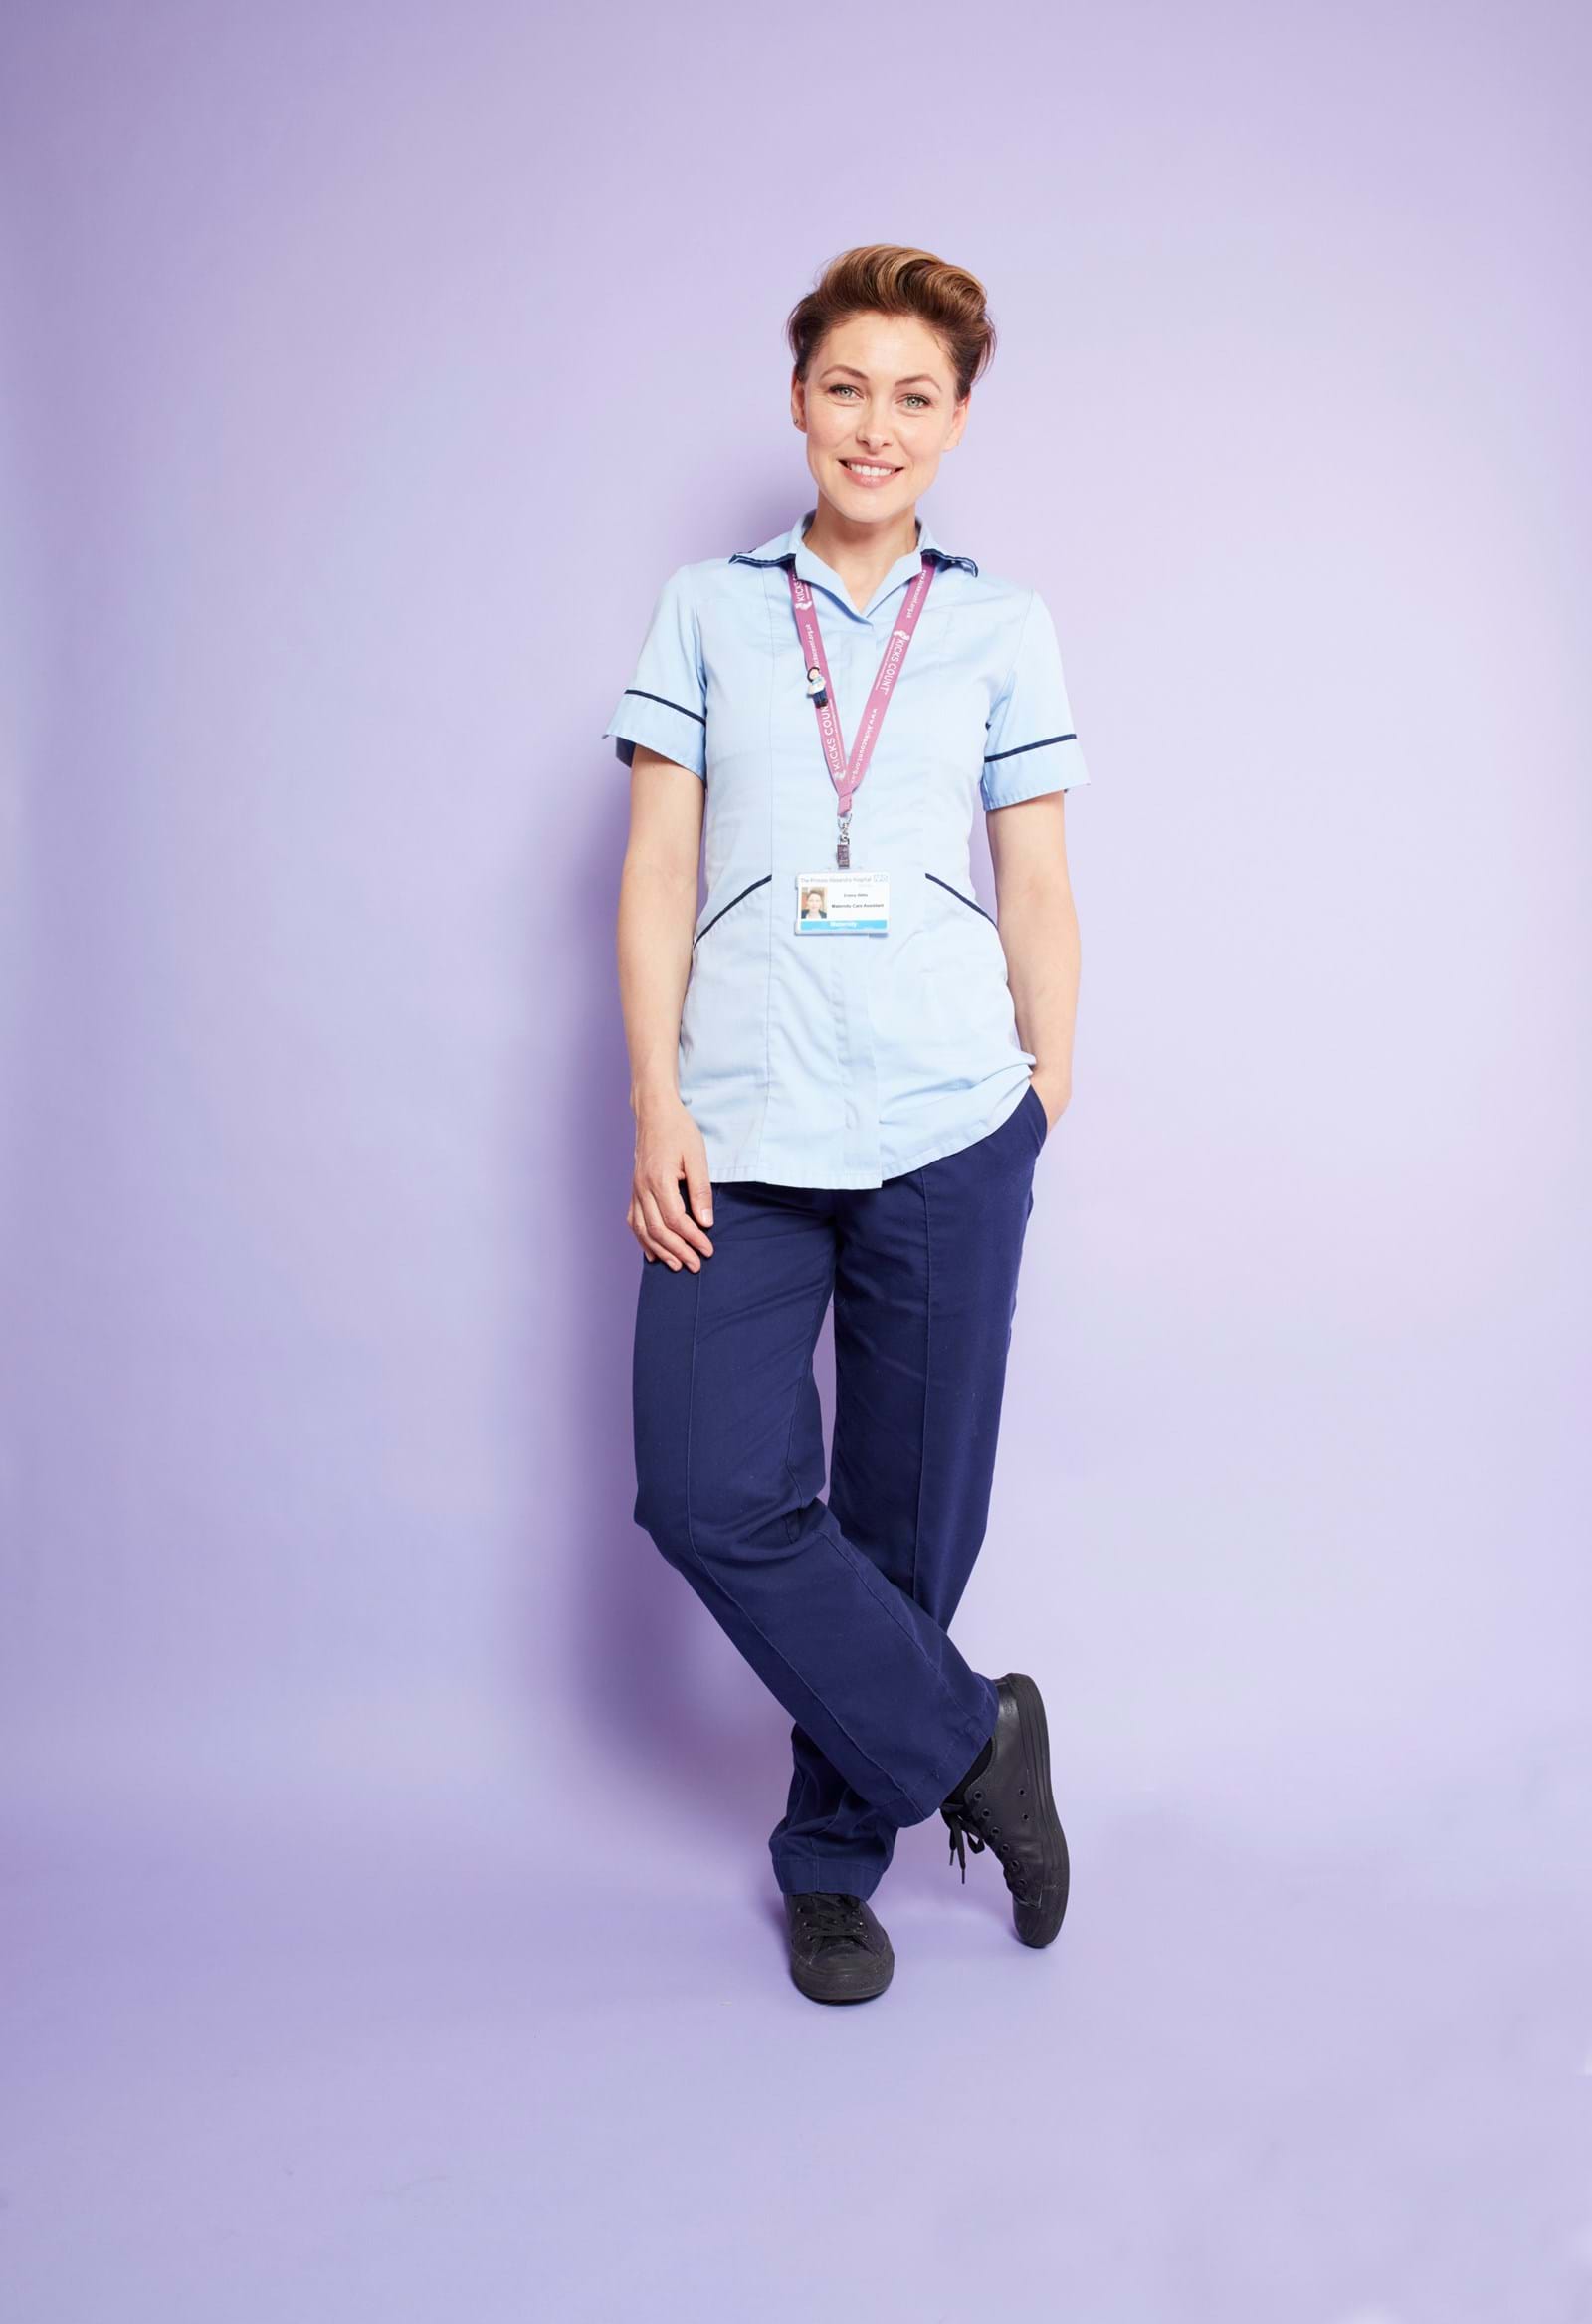 EMMA WILLIS REPRISES MATERNITY CARE ASSISTANT ROLE IN FIRECRACKER'S SECOND SERIES FOR W